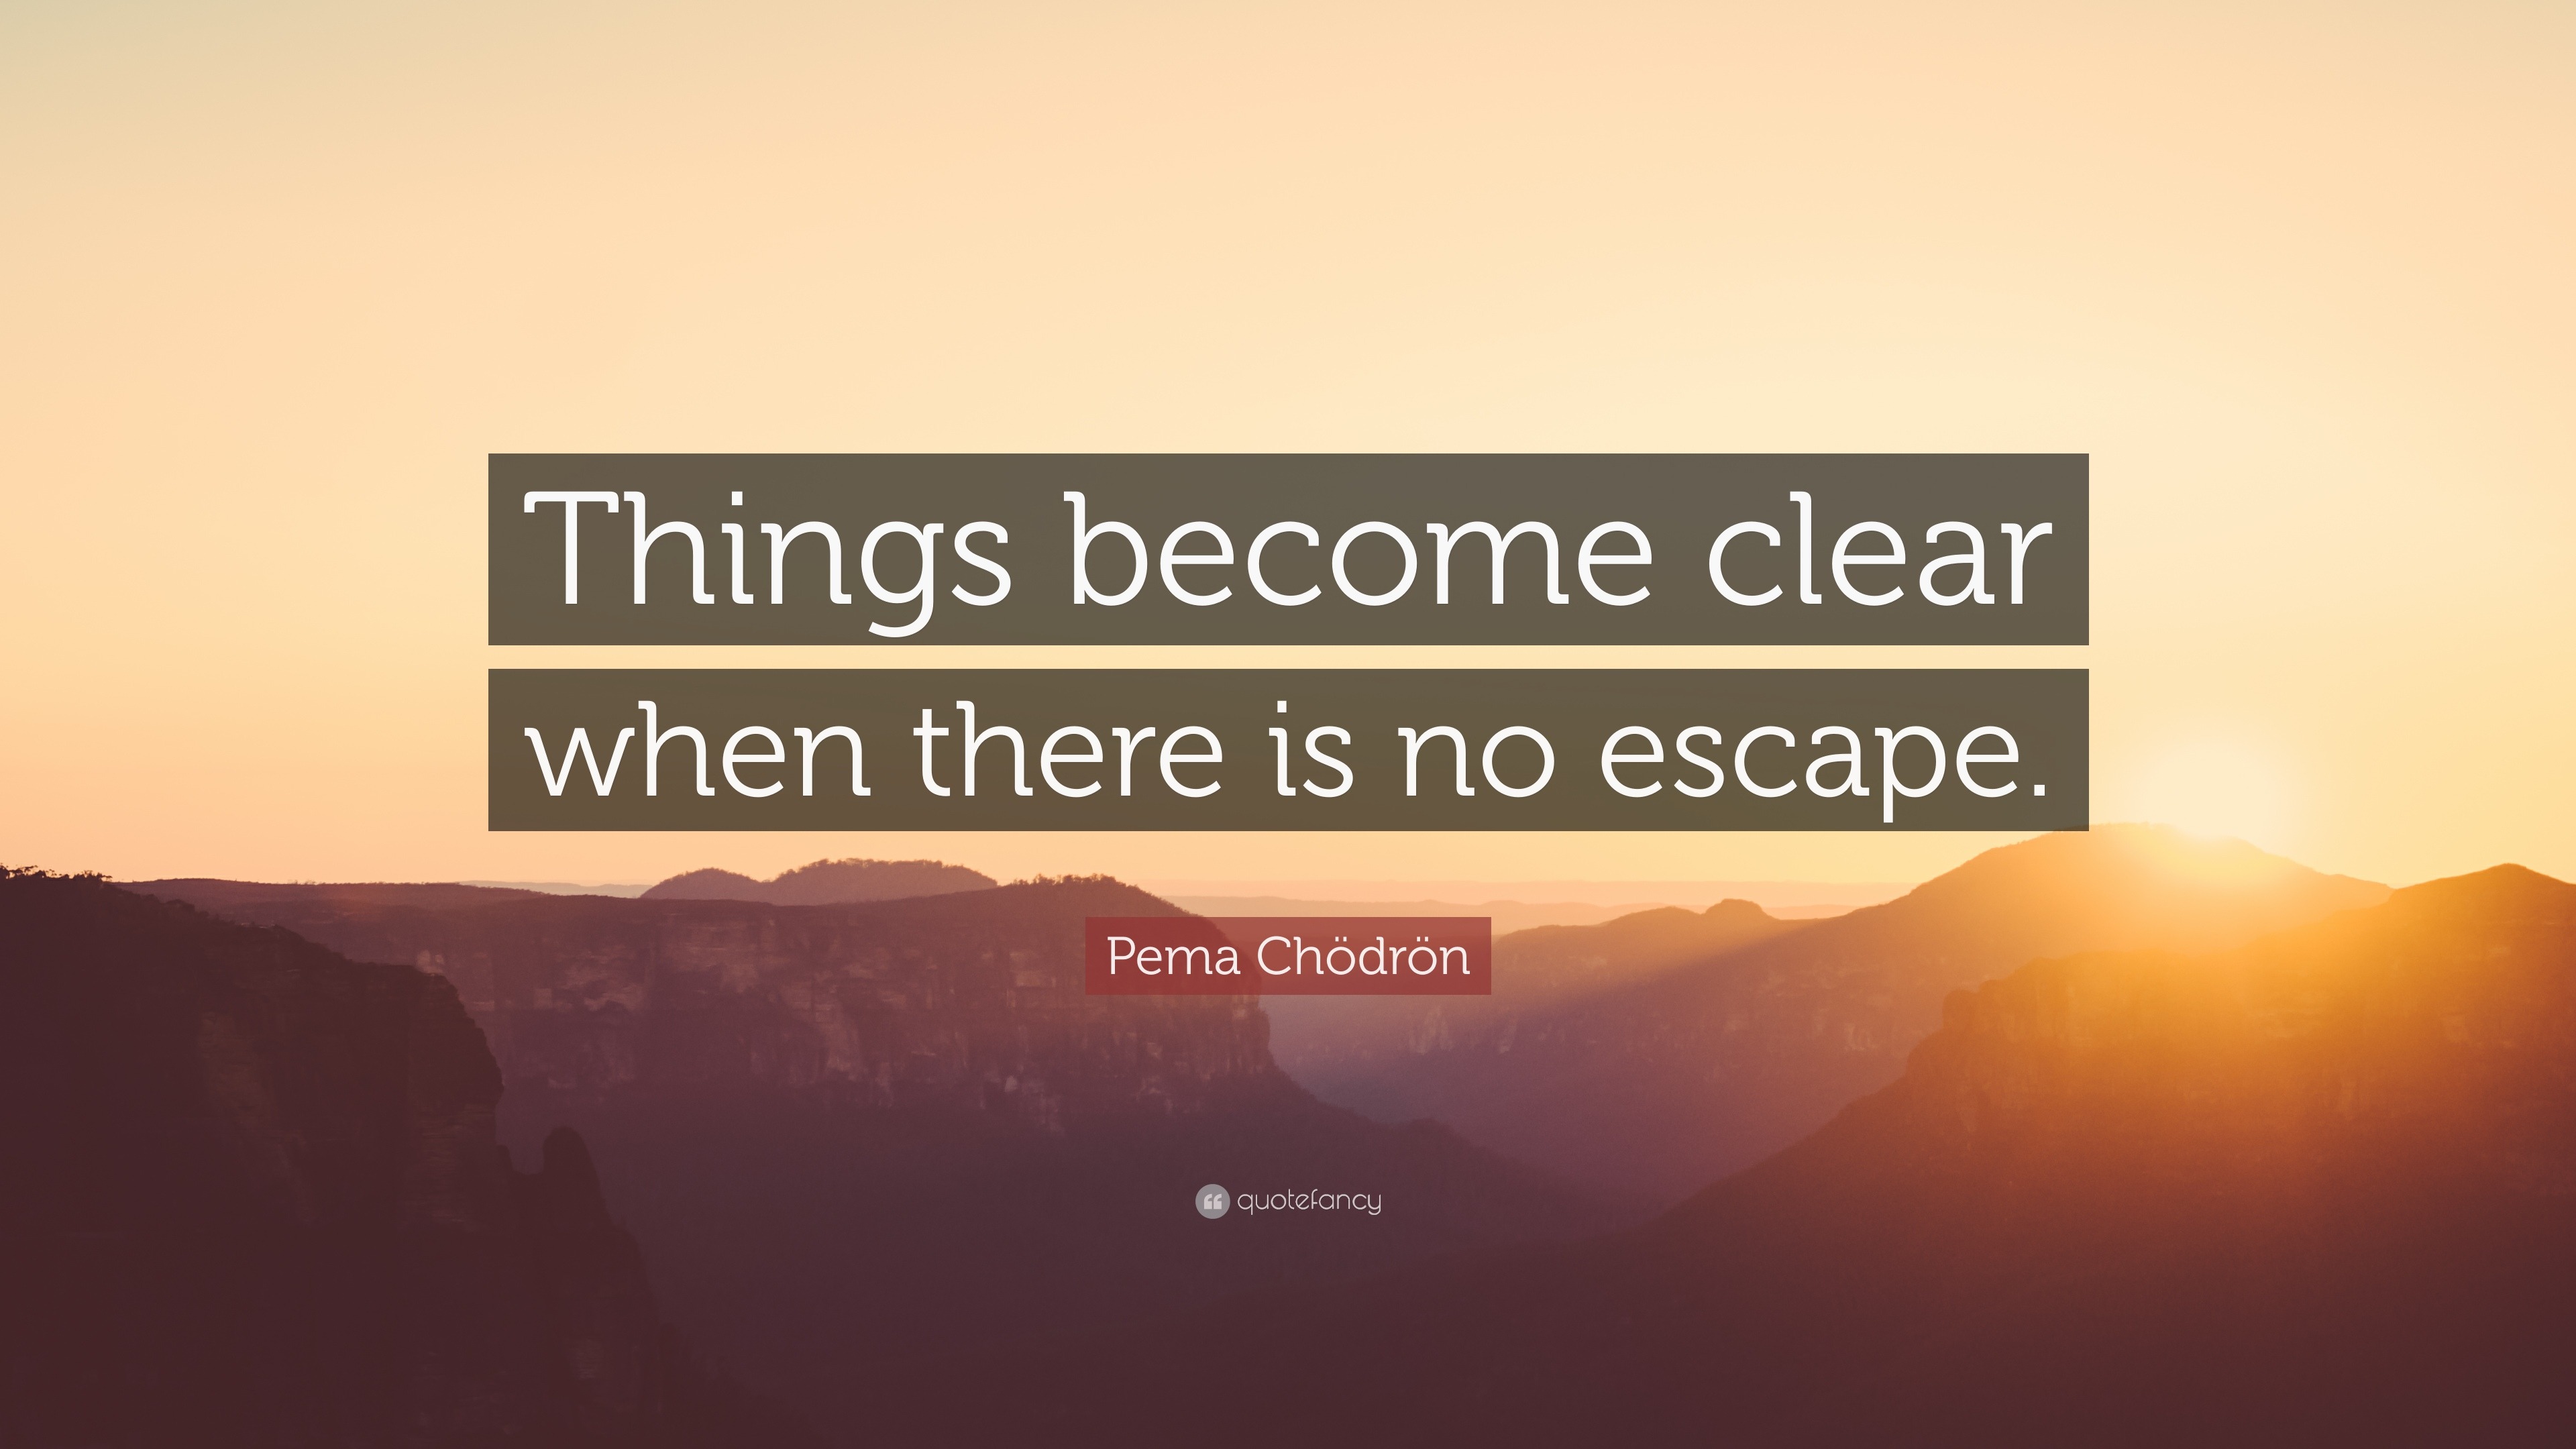 Pema Chödrön Quote: “Things become clear when there is no escape.”